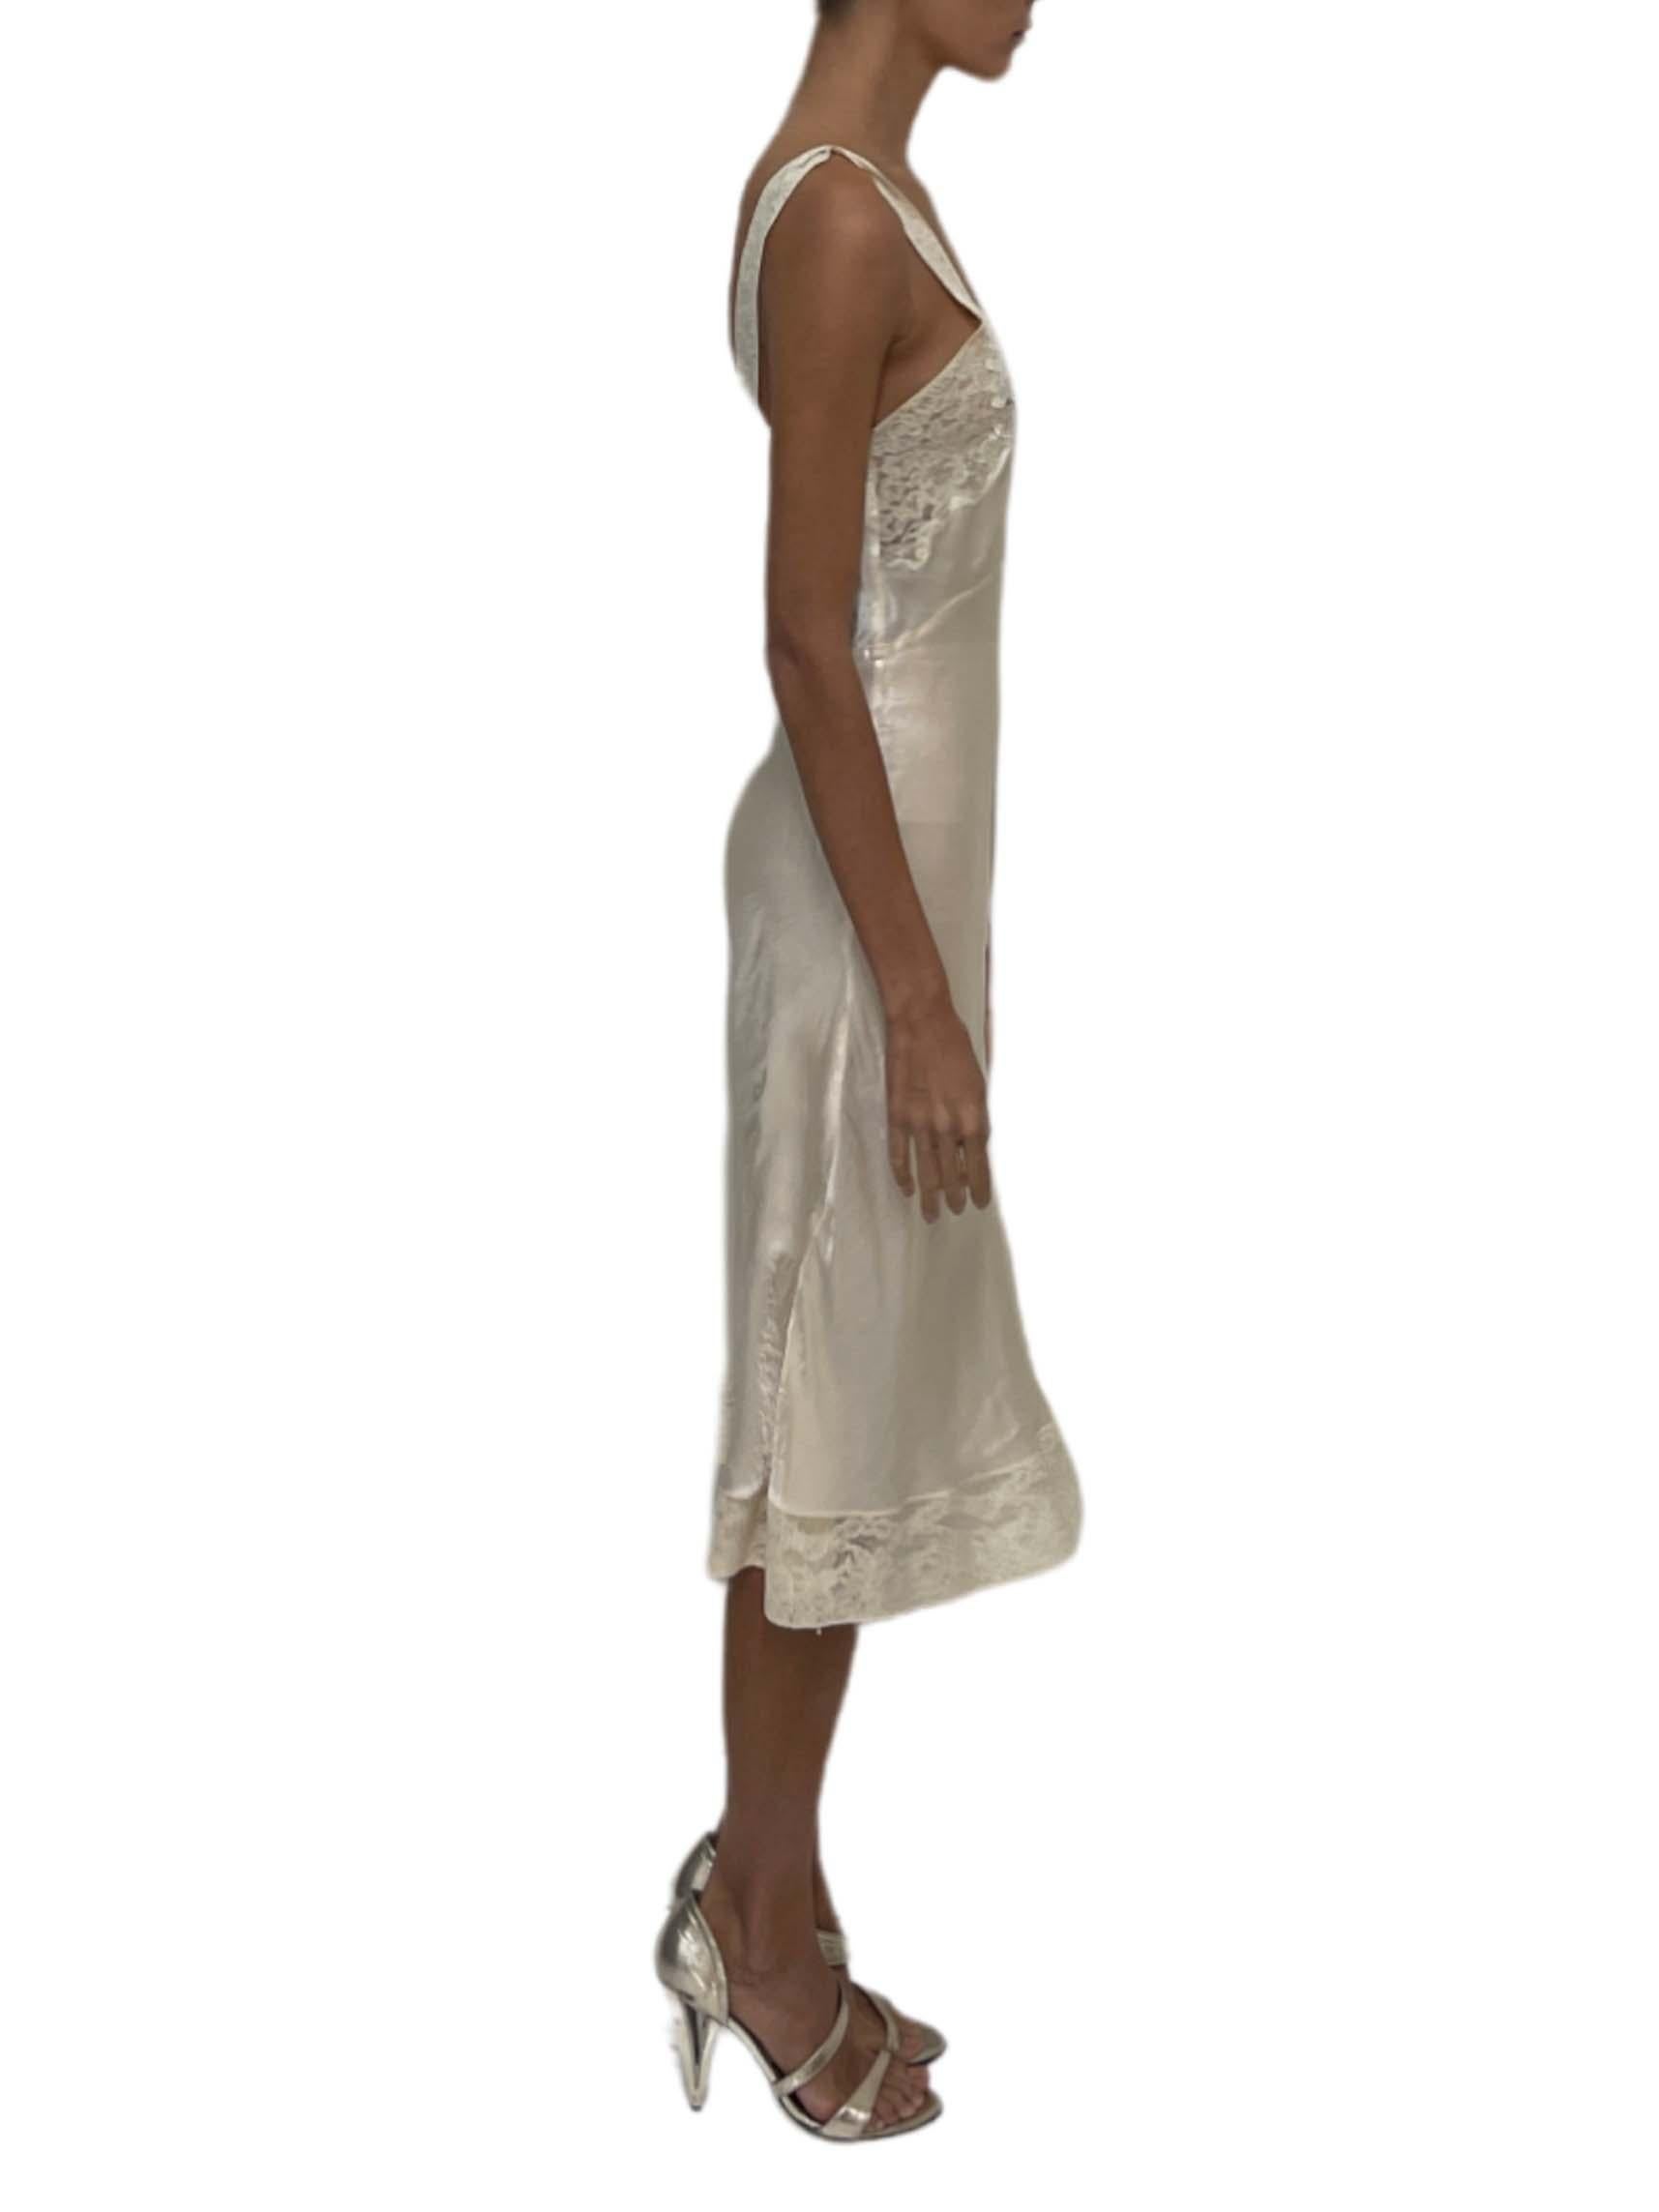 Brown 1940S Ivory Bias Cut Rayon Satin Slip With Lace Trim For Sale